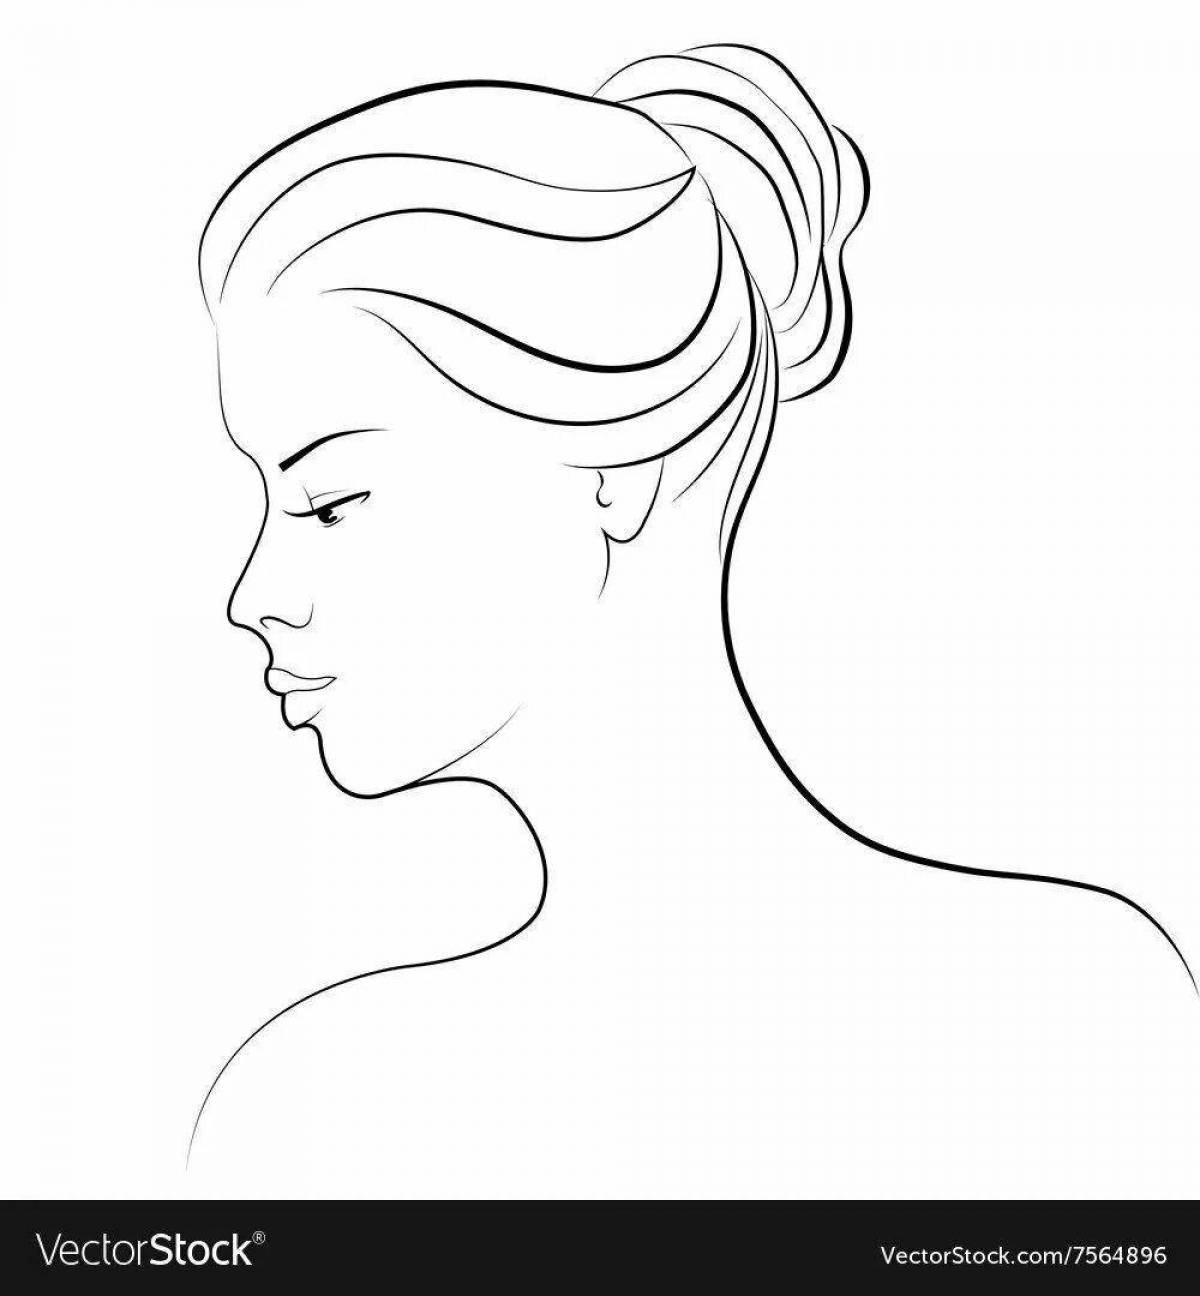 Playful profile face coloring page